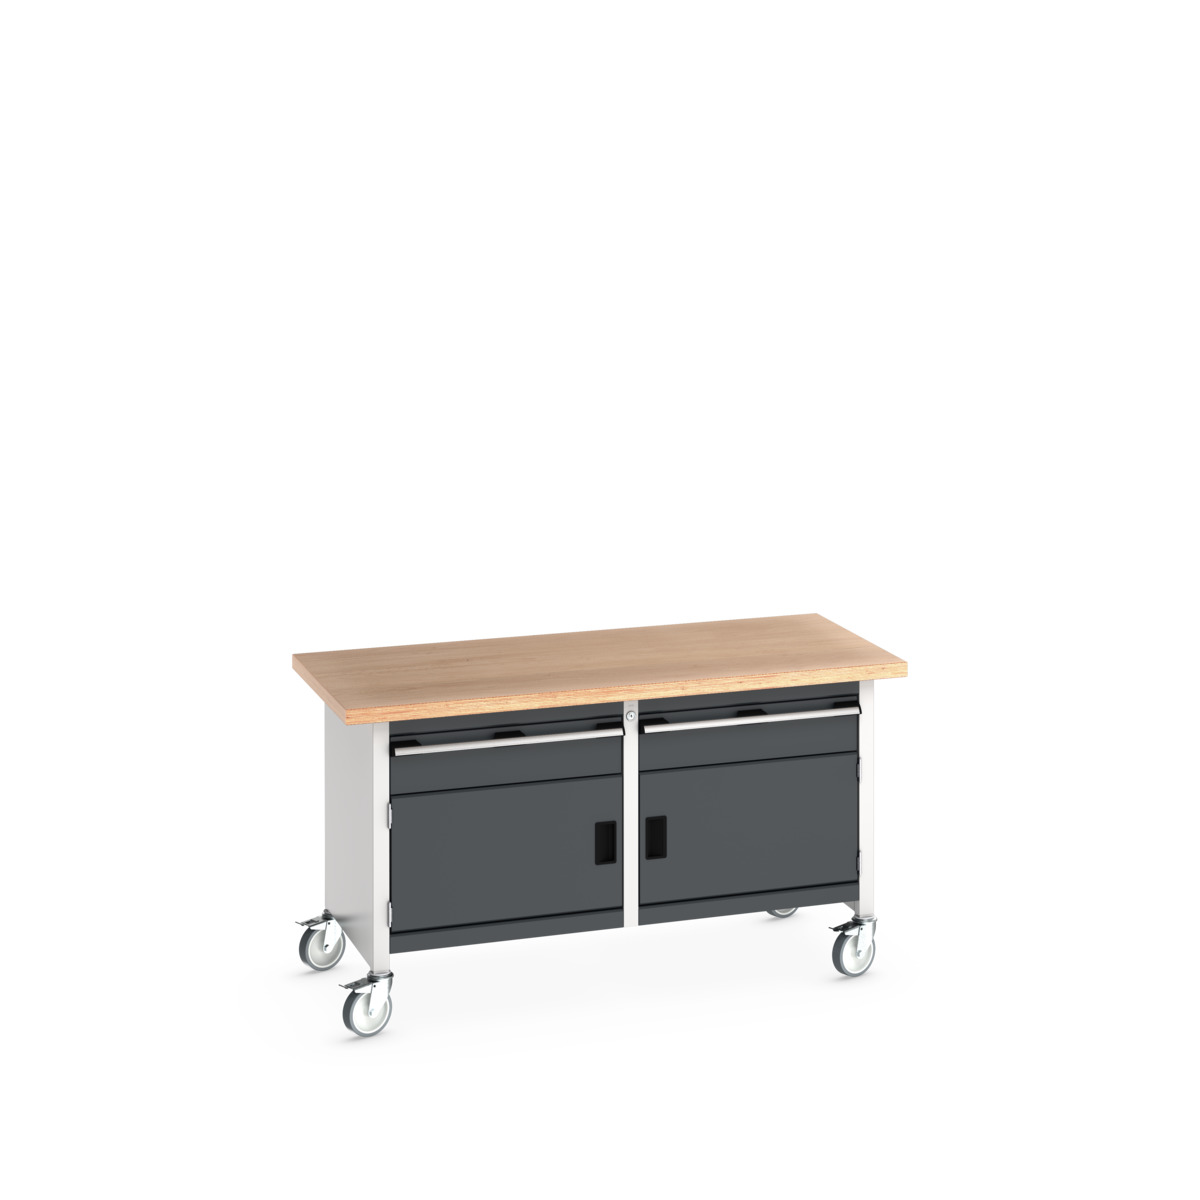 41002103.19V - cubio mobile storage bench (mpx)